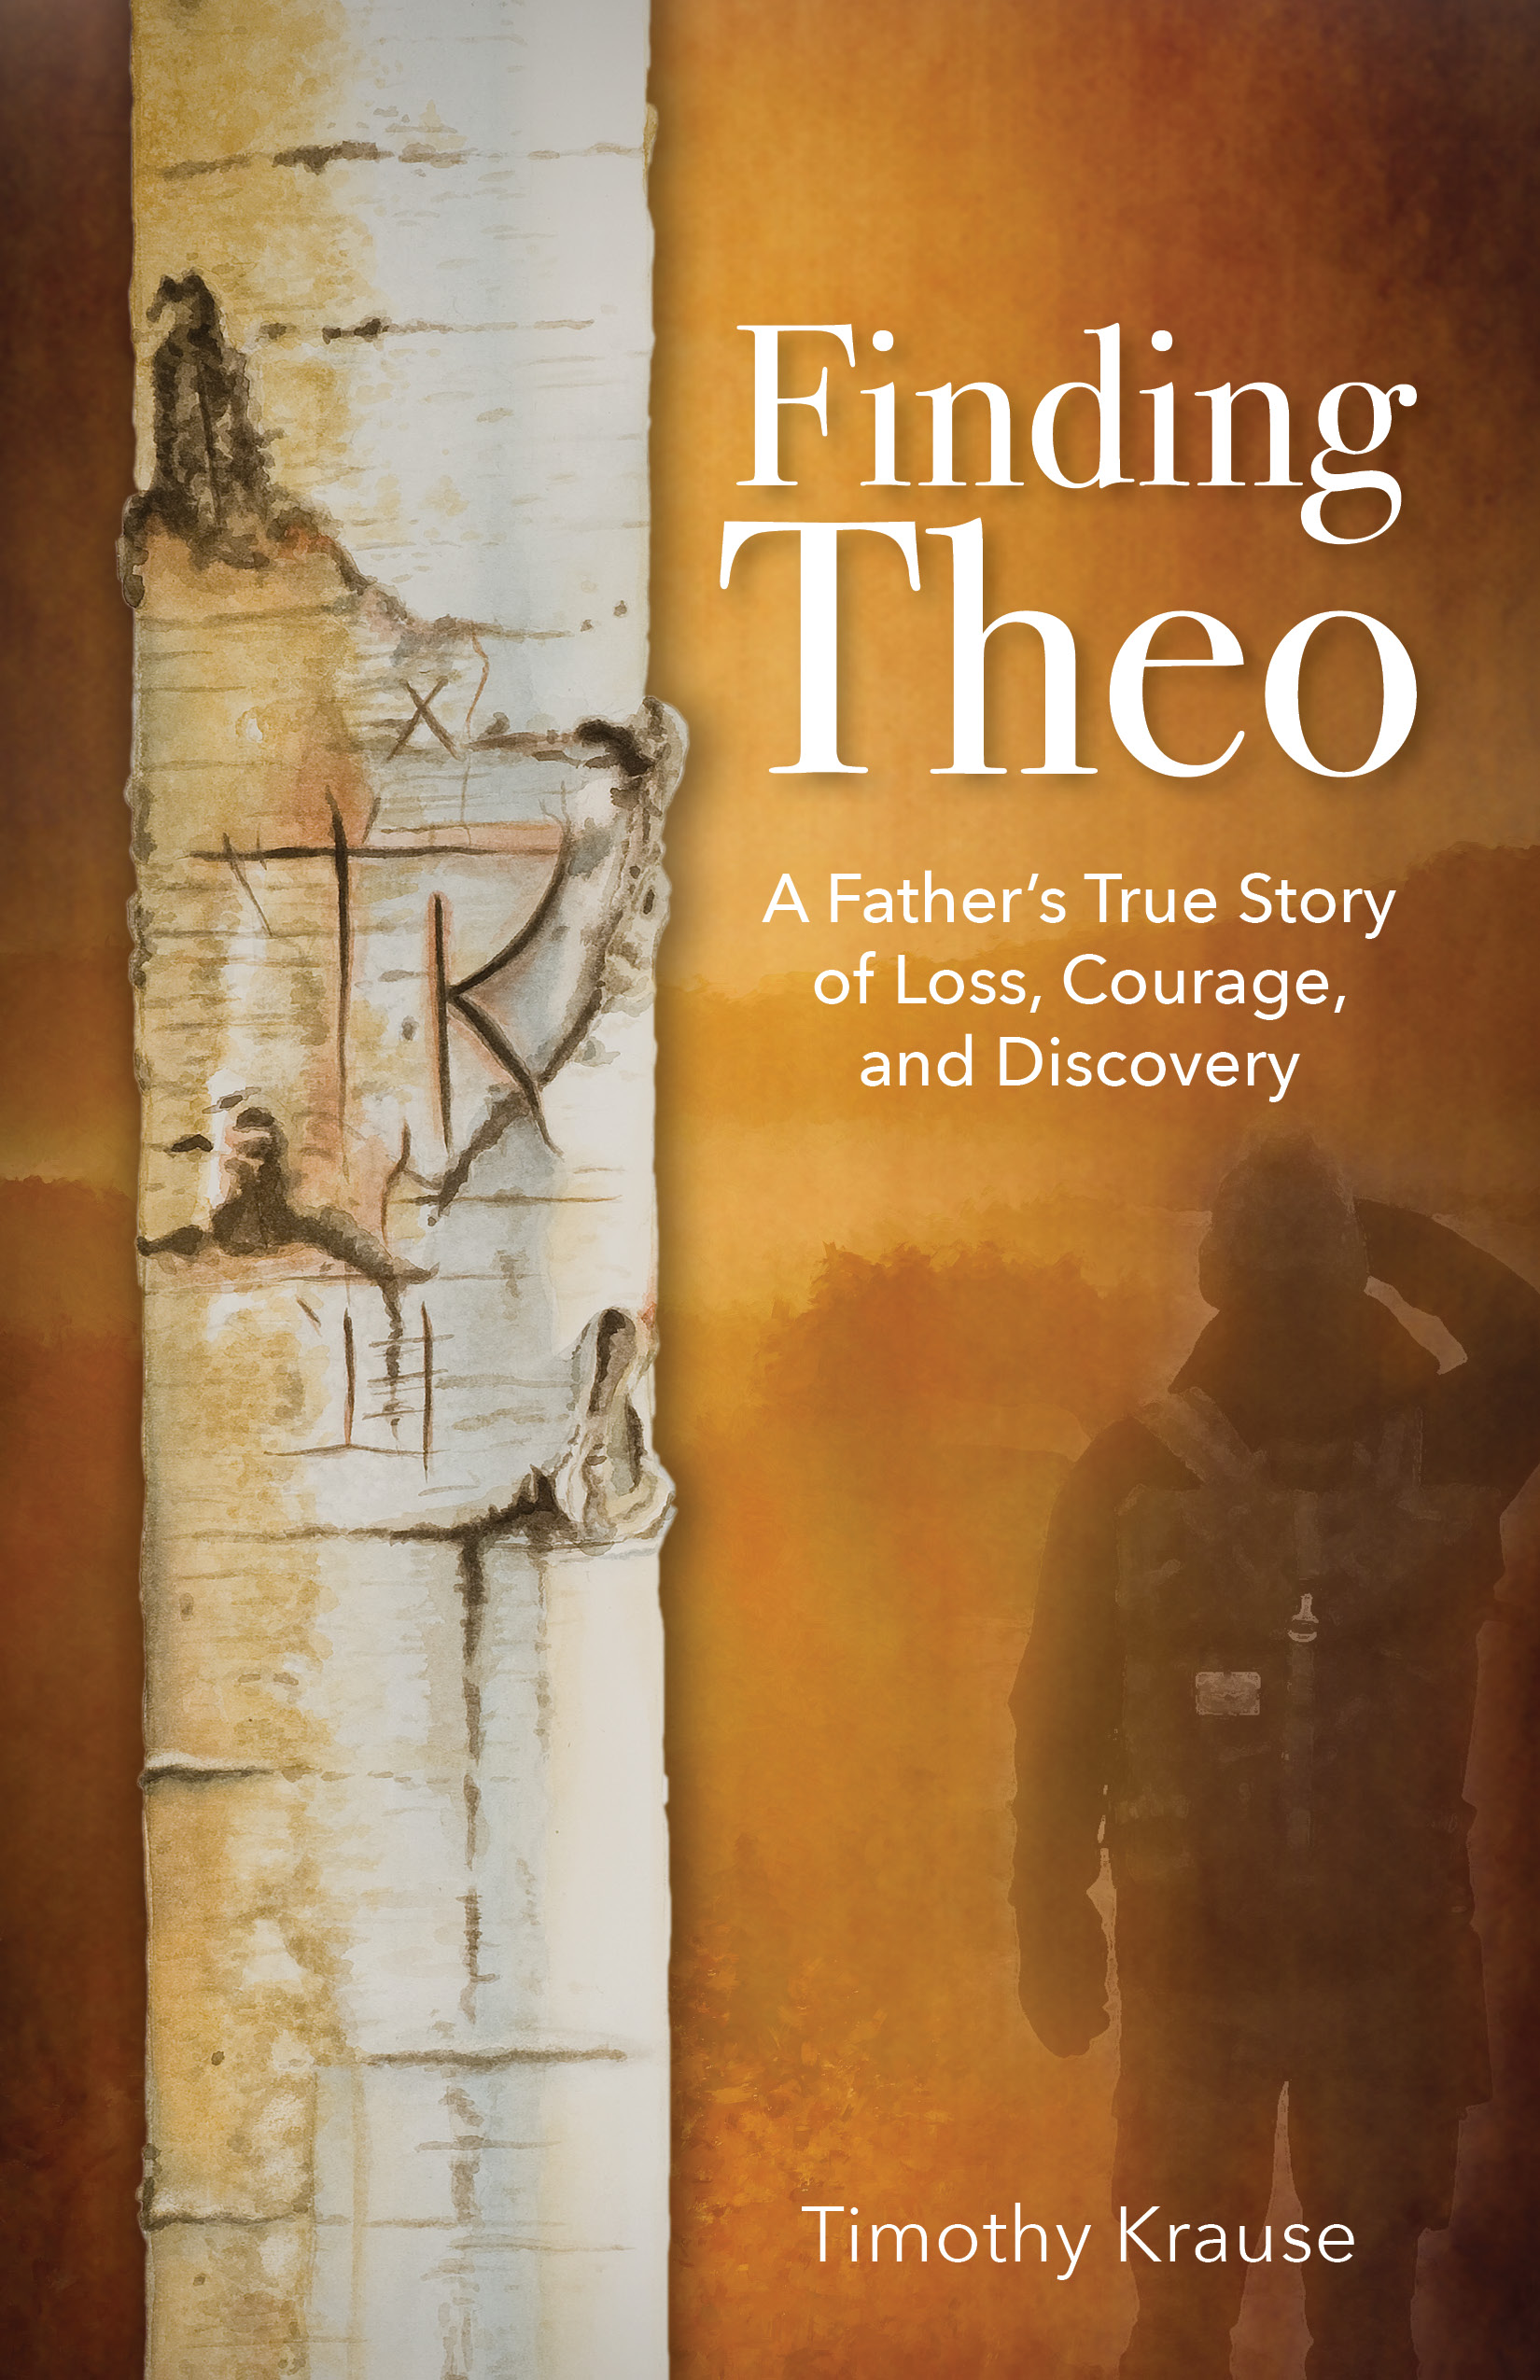 "Krause delivers a stirring account of his son Theo's severe spinal injury and recovery." -- Publishers Weekly